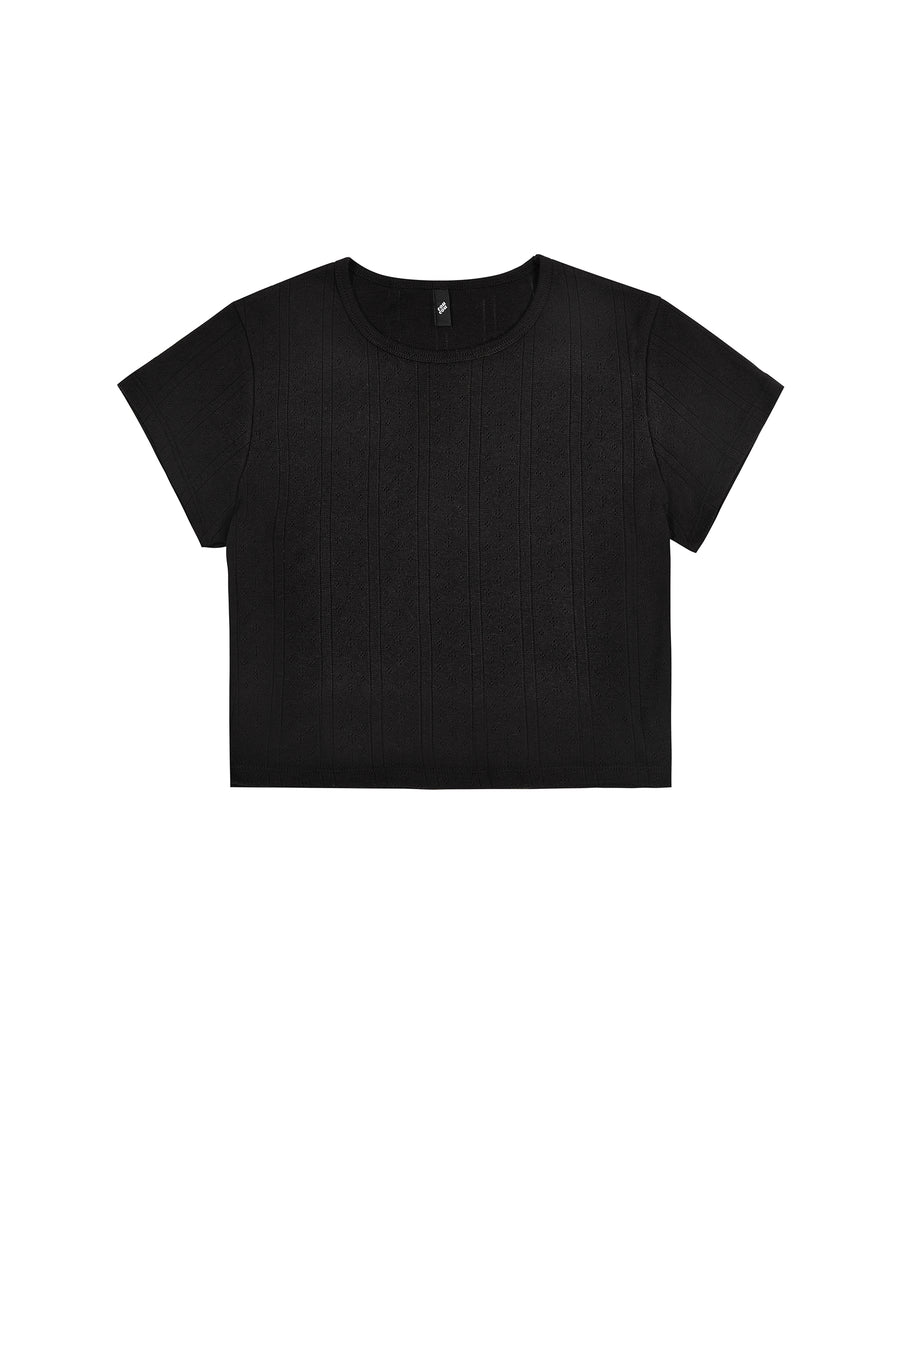 The Baby Tee Black – Cou Cou Intimates